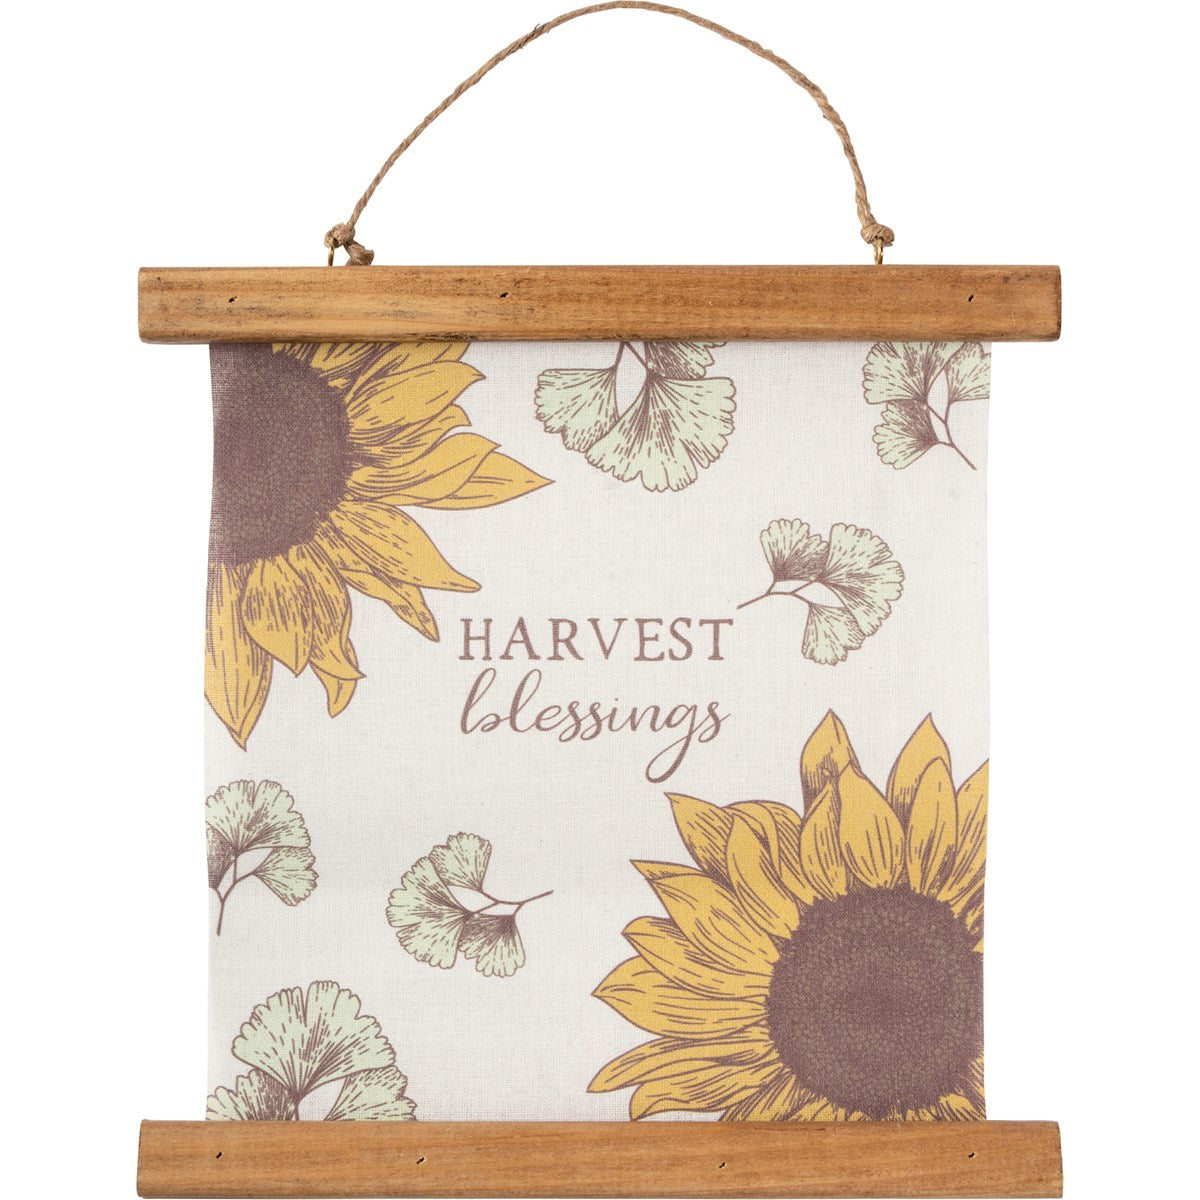 Wall Hanging - "Harvest Blessings"